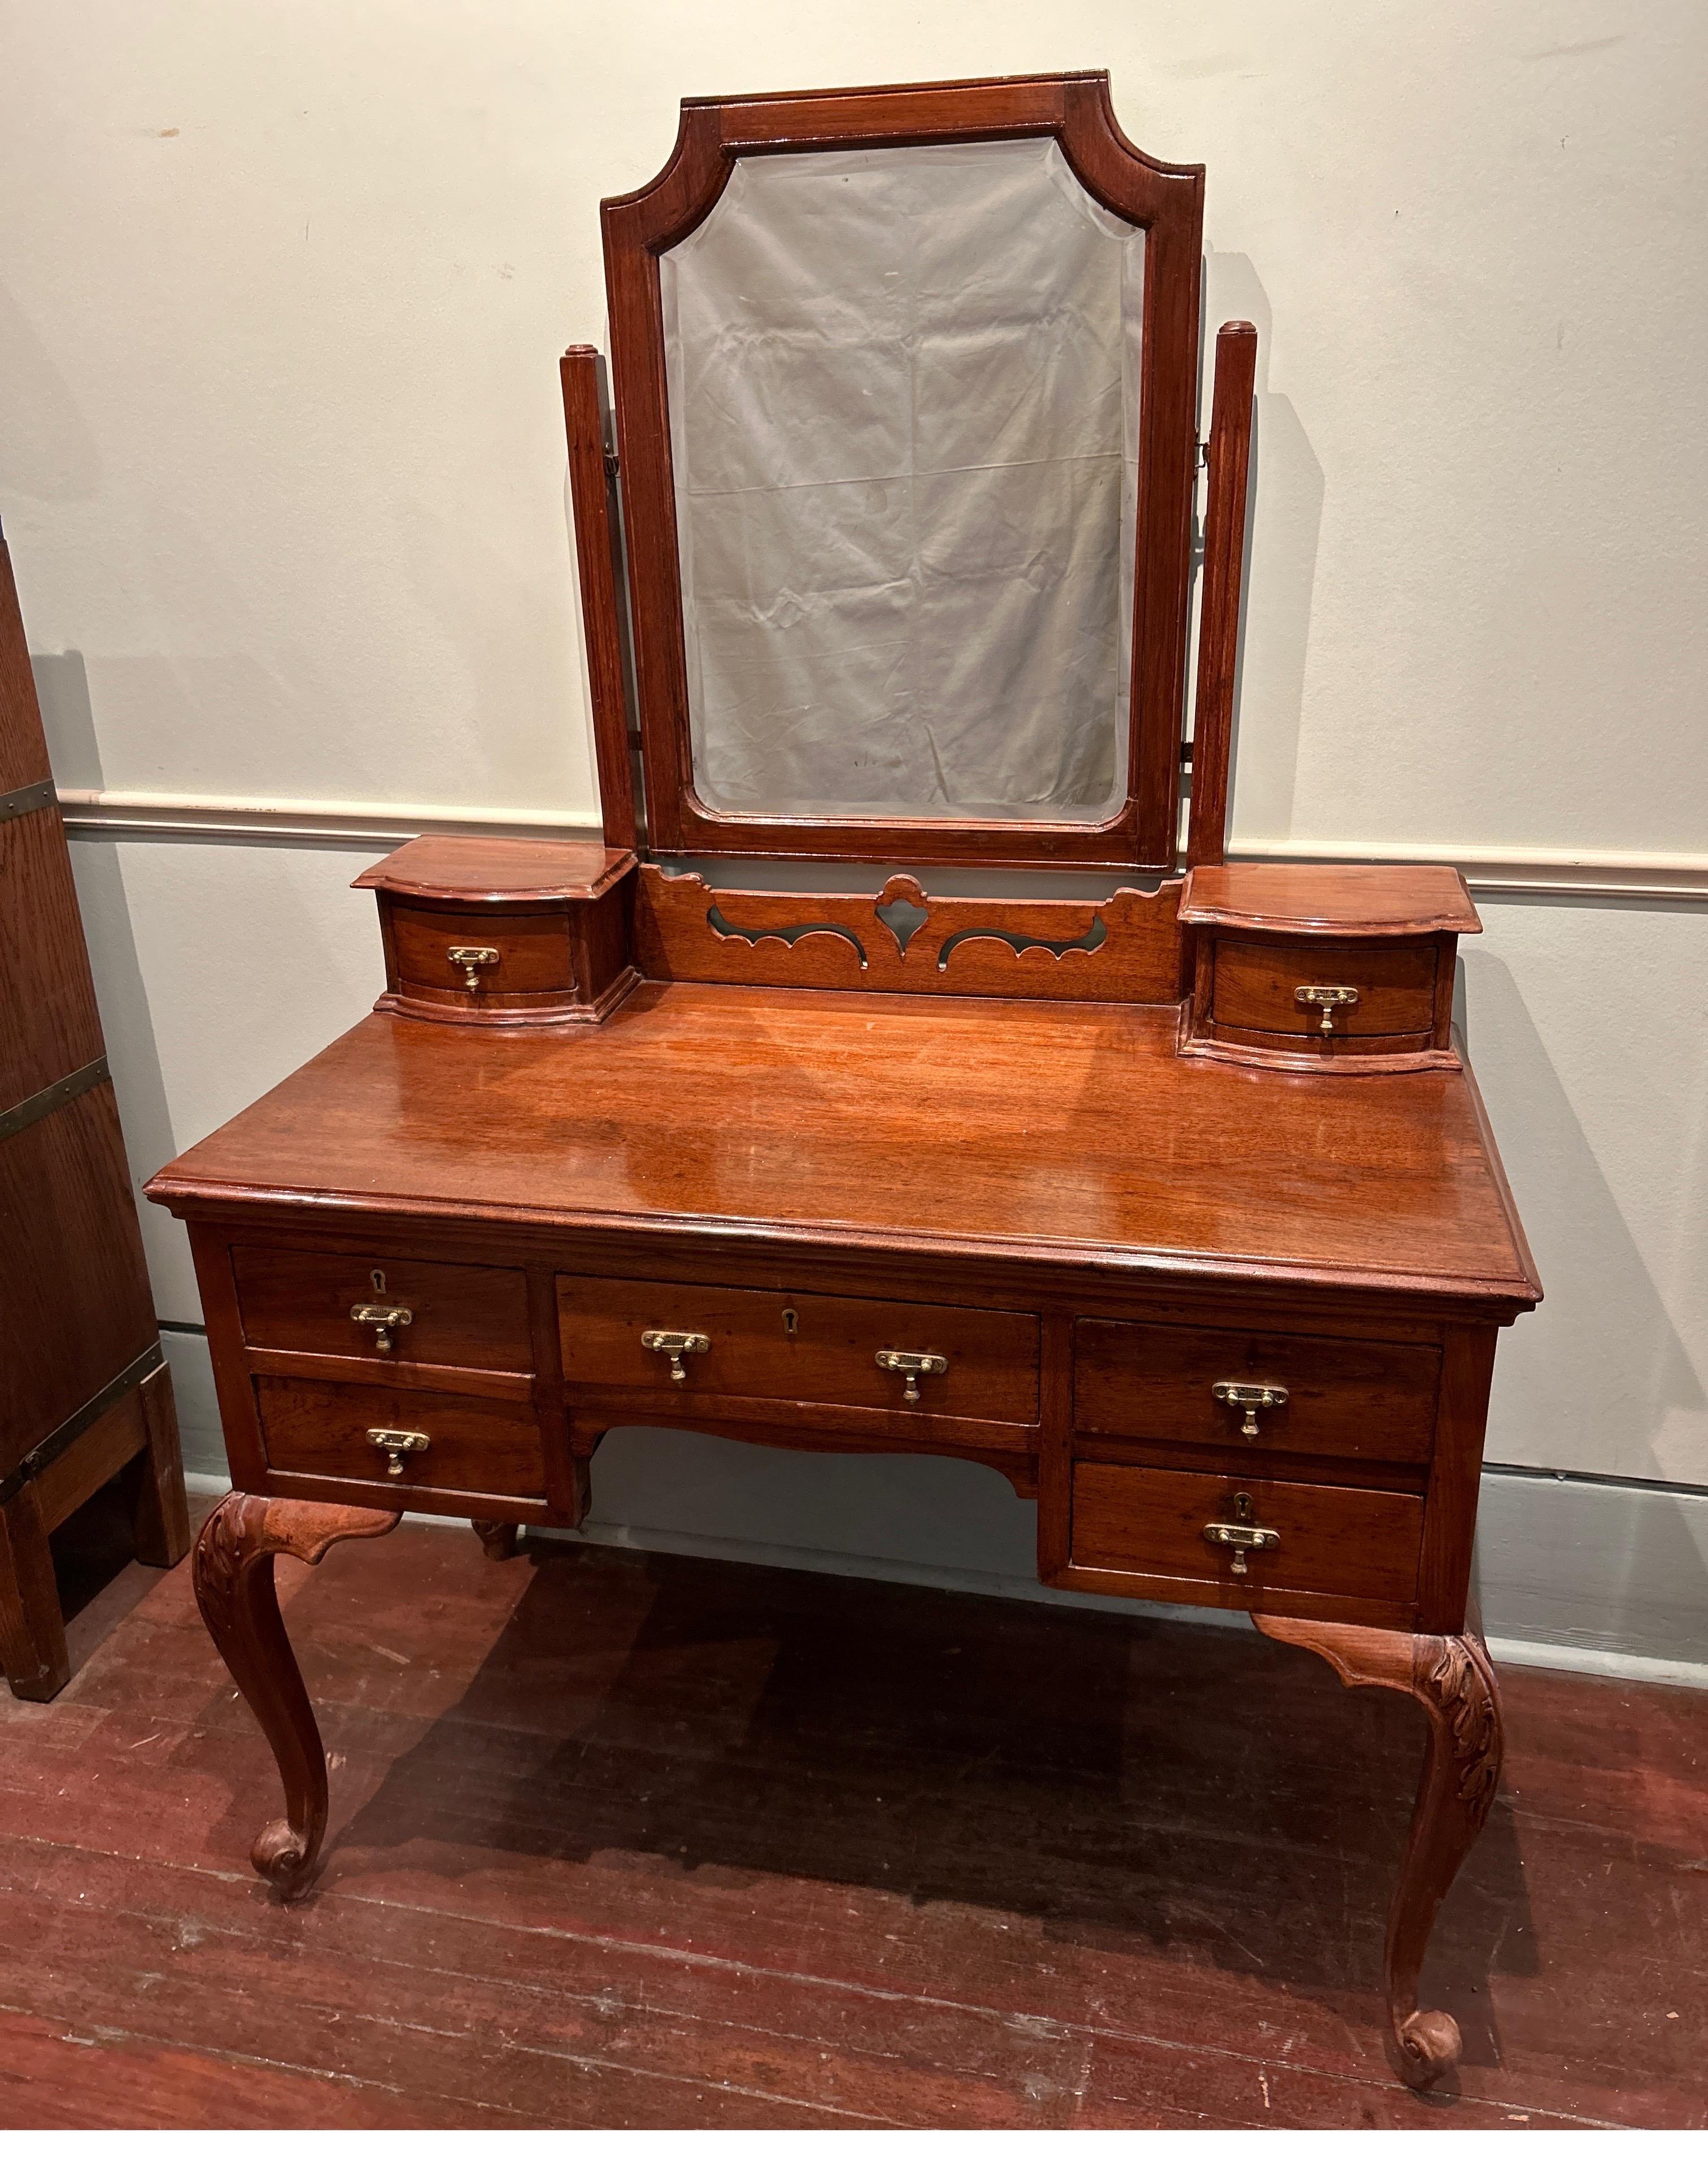 Anglo Raj Art Nouveau Teak Hand Carved Vanity Cum Writing Table With Drawers & Brass Pulls For Sale